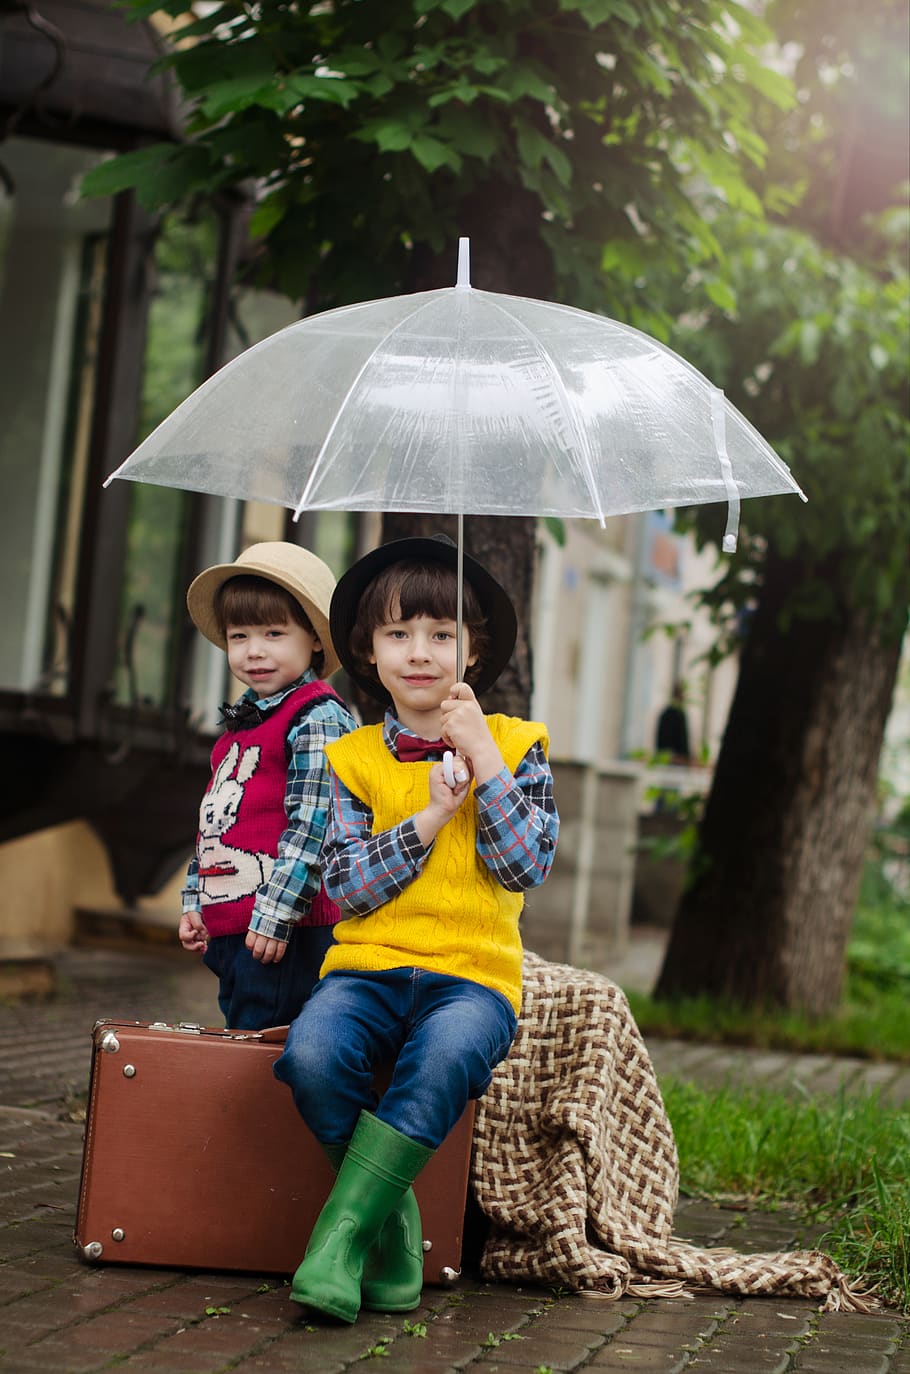 Girl Holding Umbrella While Sitting on Brown Suitcase, adorable